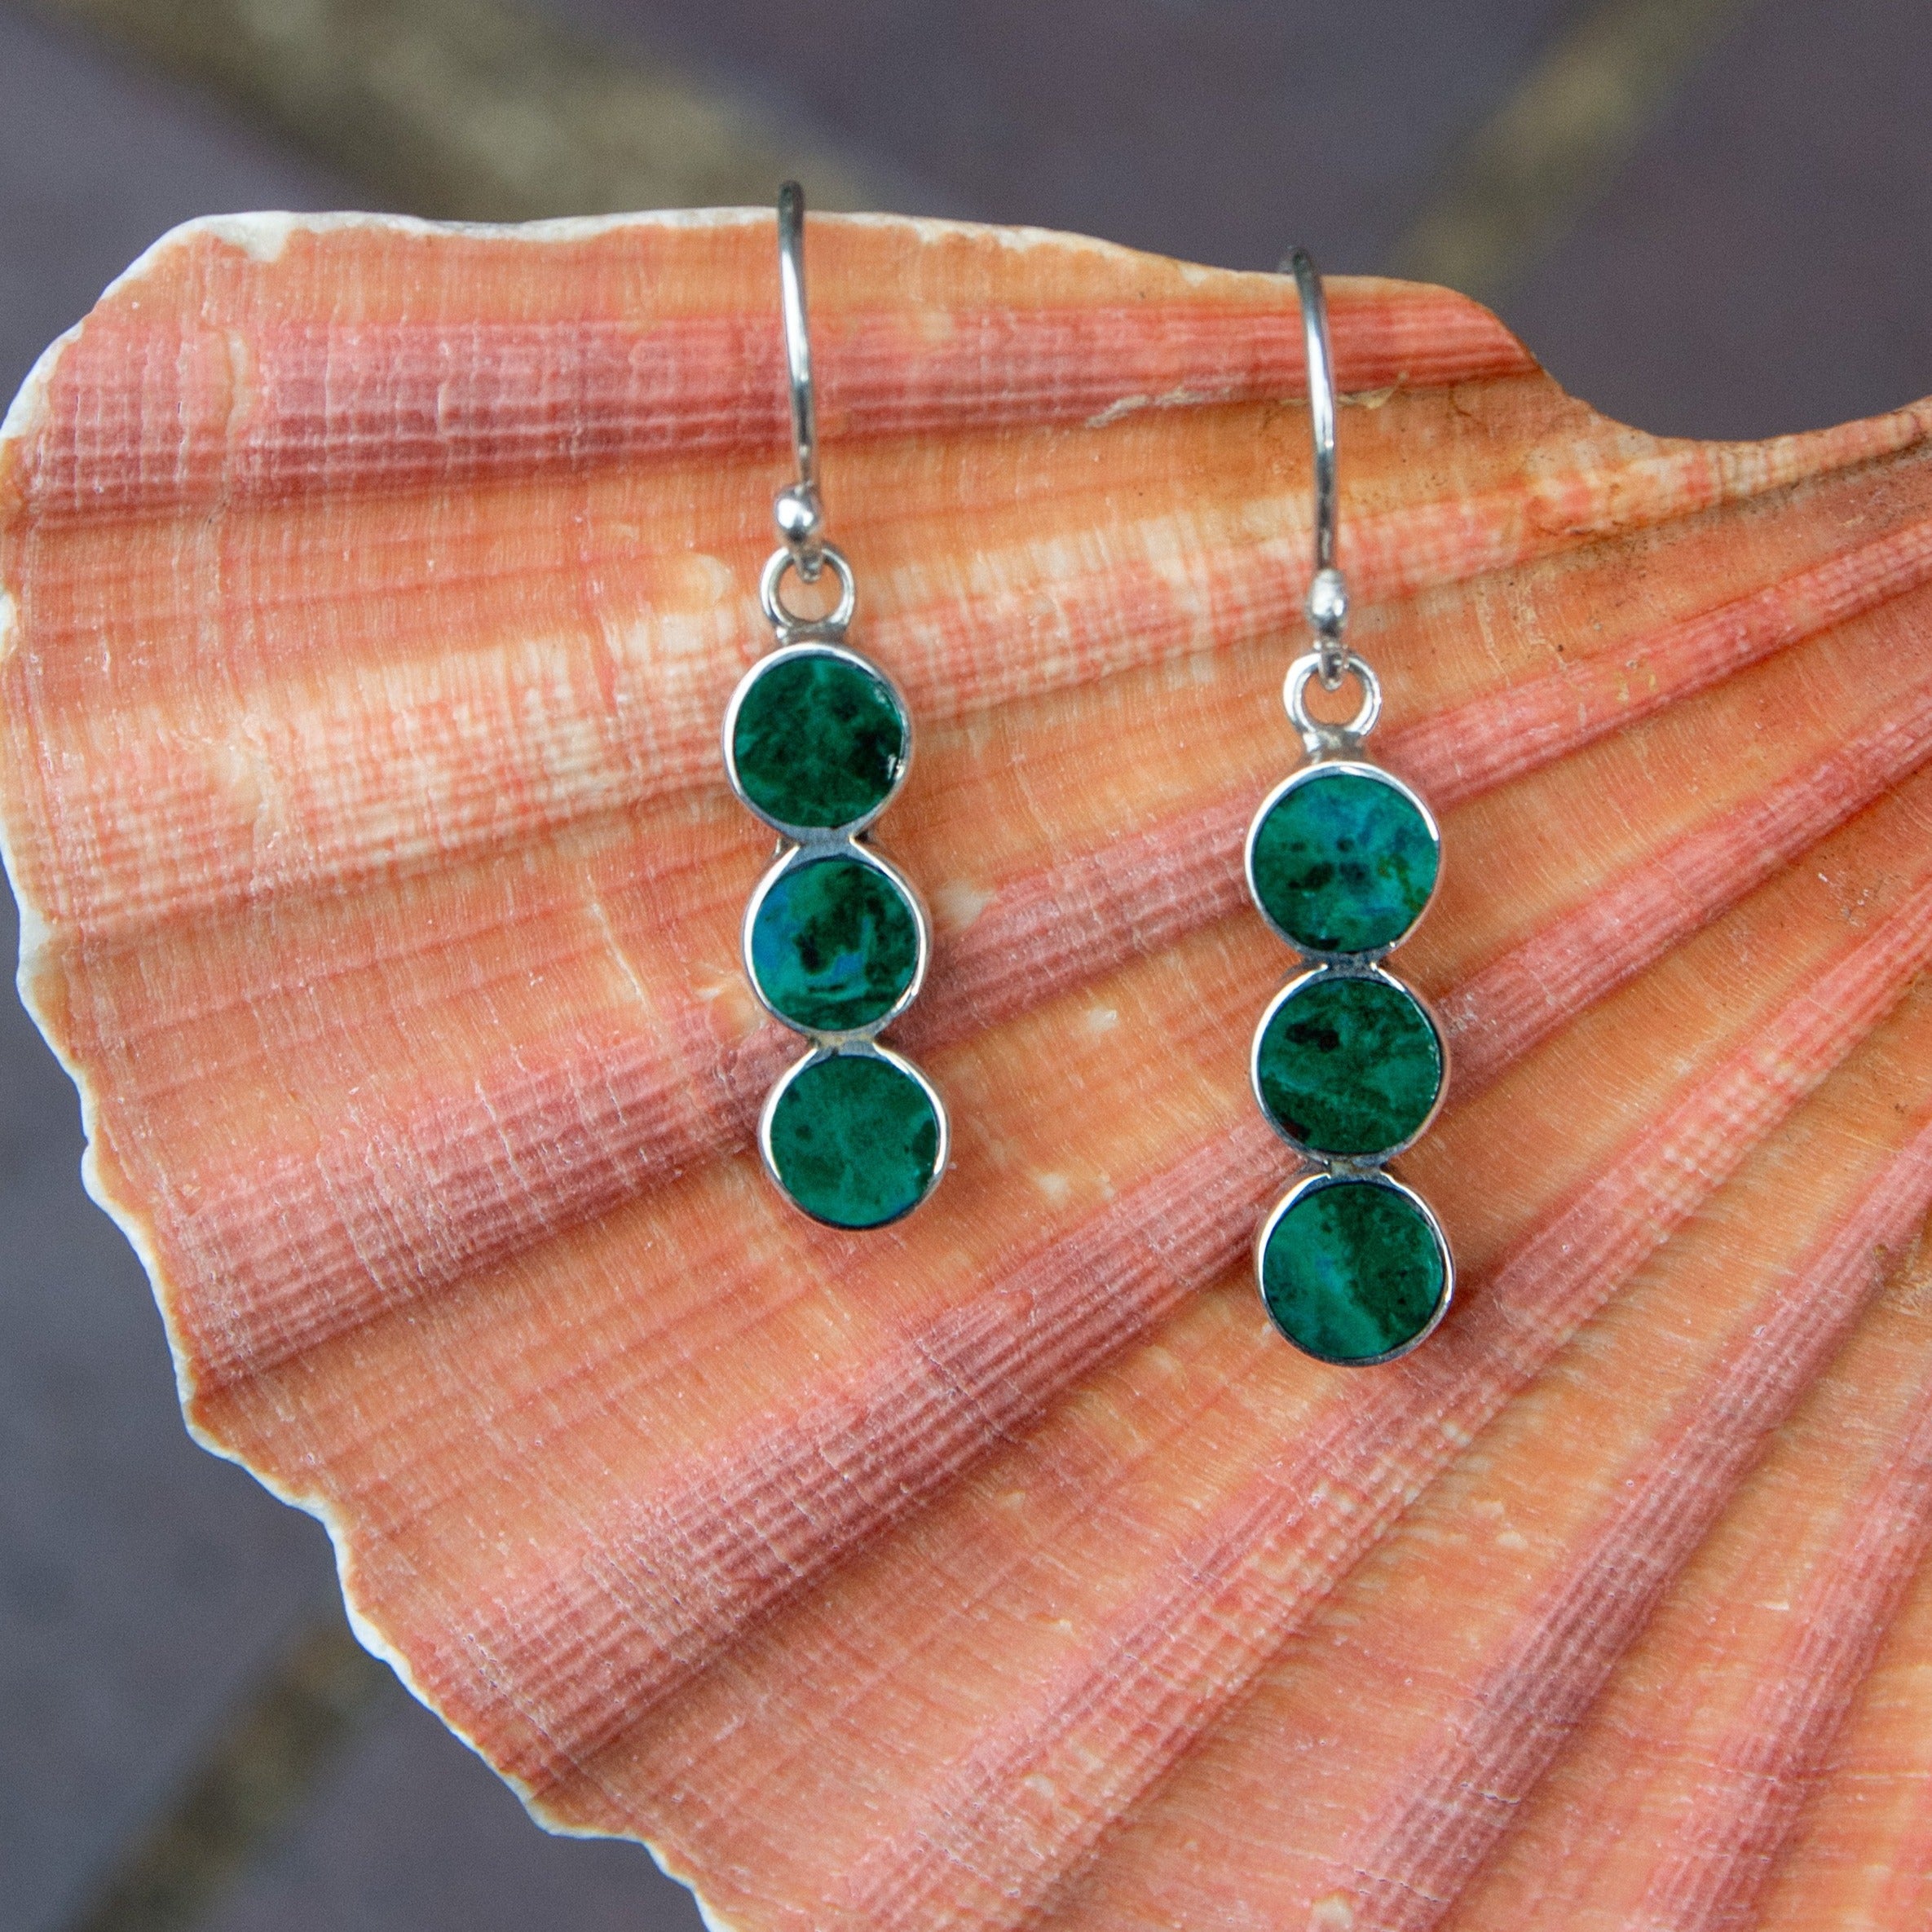 Three circles chrysocolla and silver 950 earrings